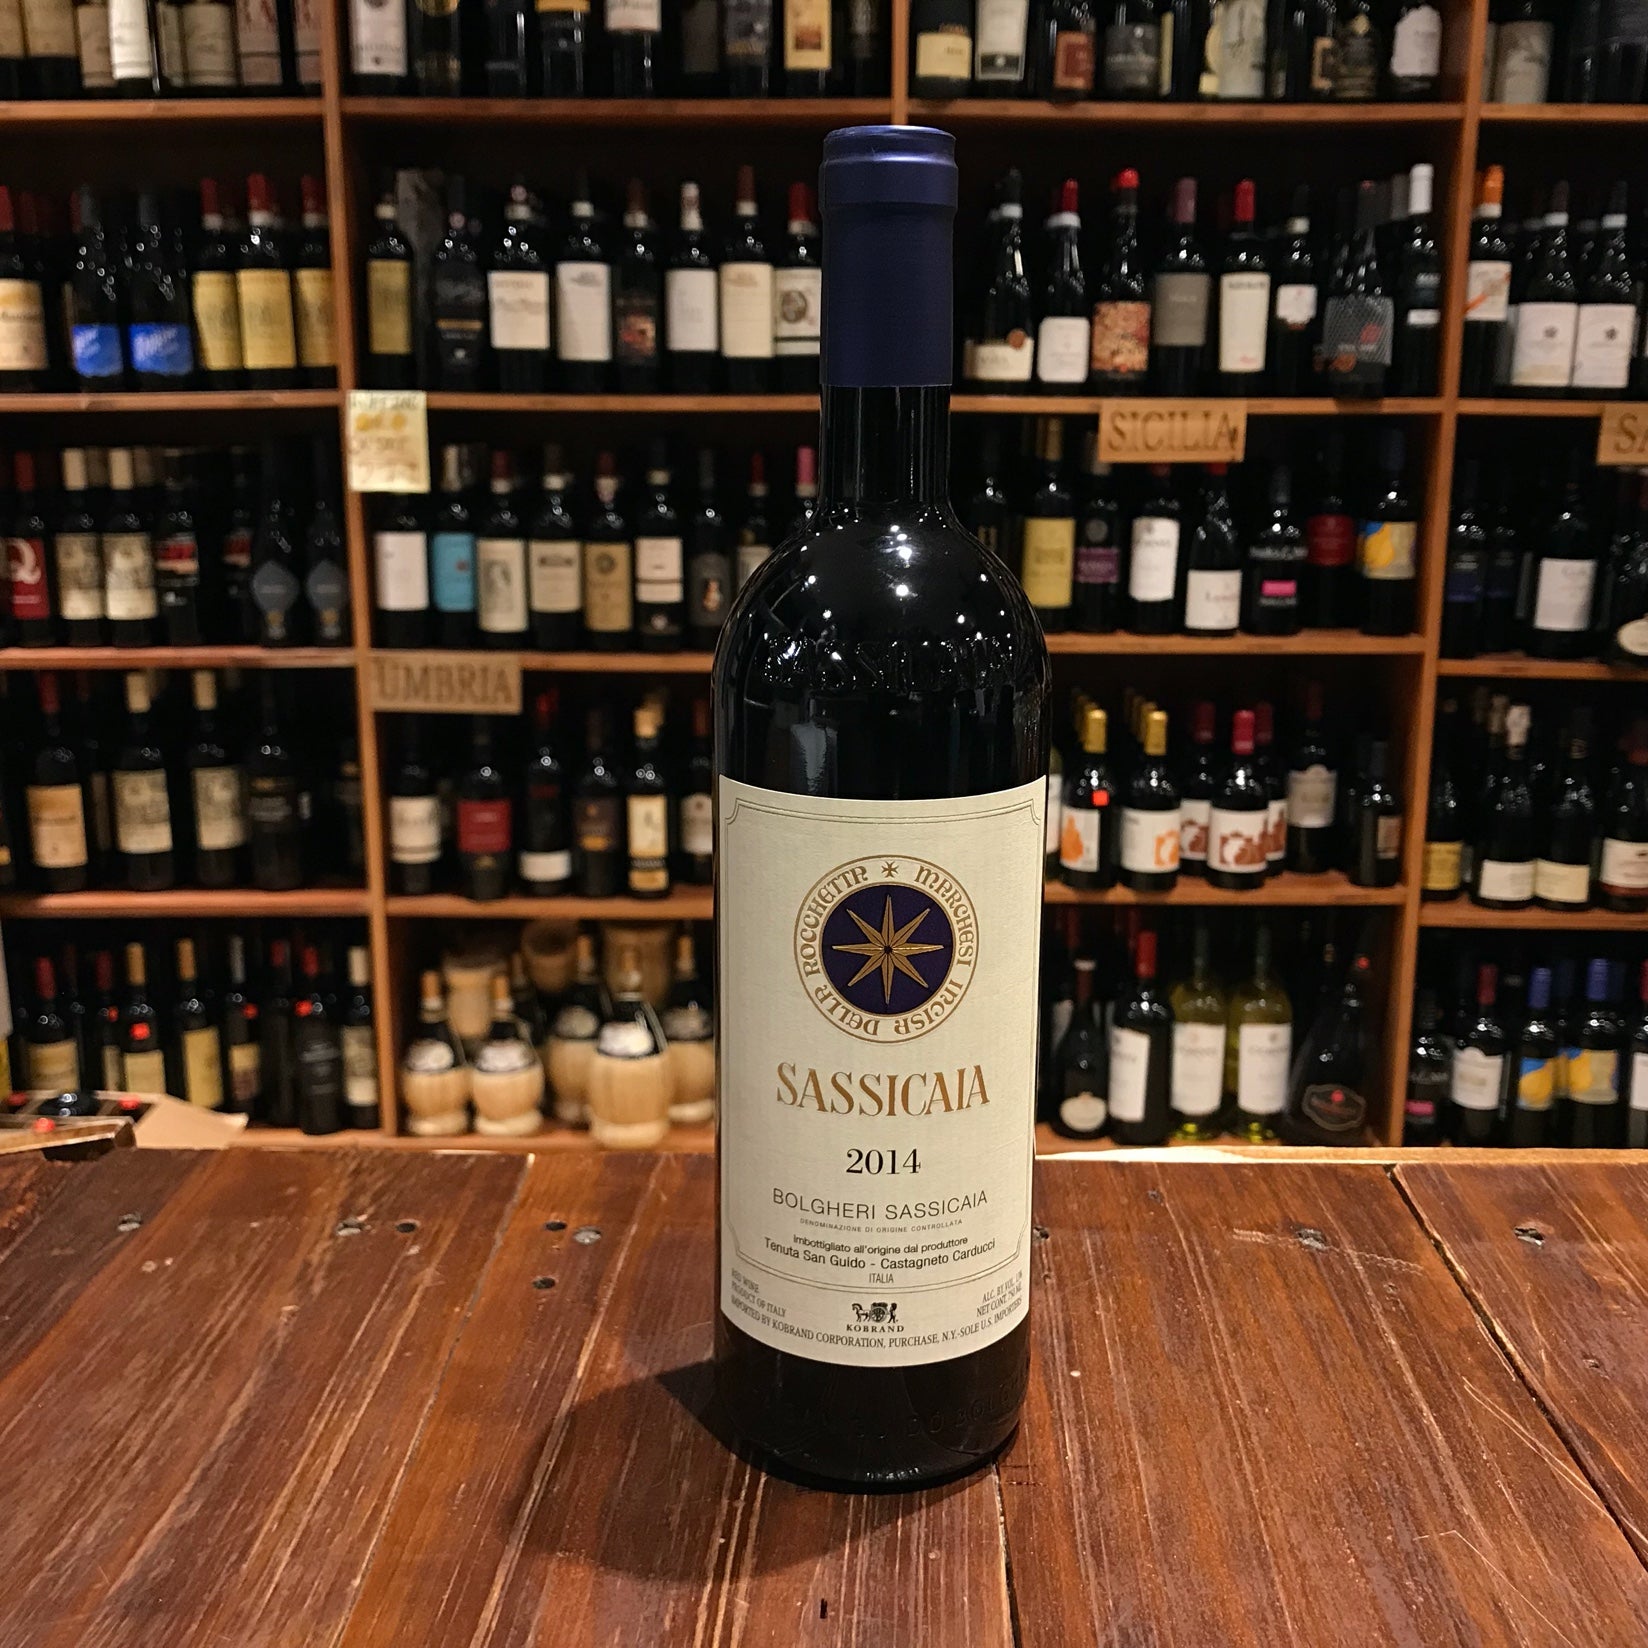 Sassicaia 750mL 2020 a dark glass wine bottle with a large white label and a blue top